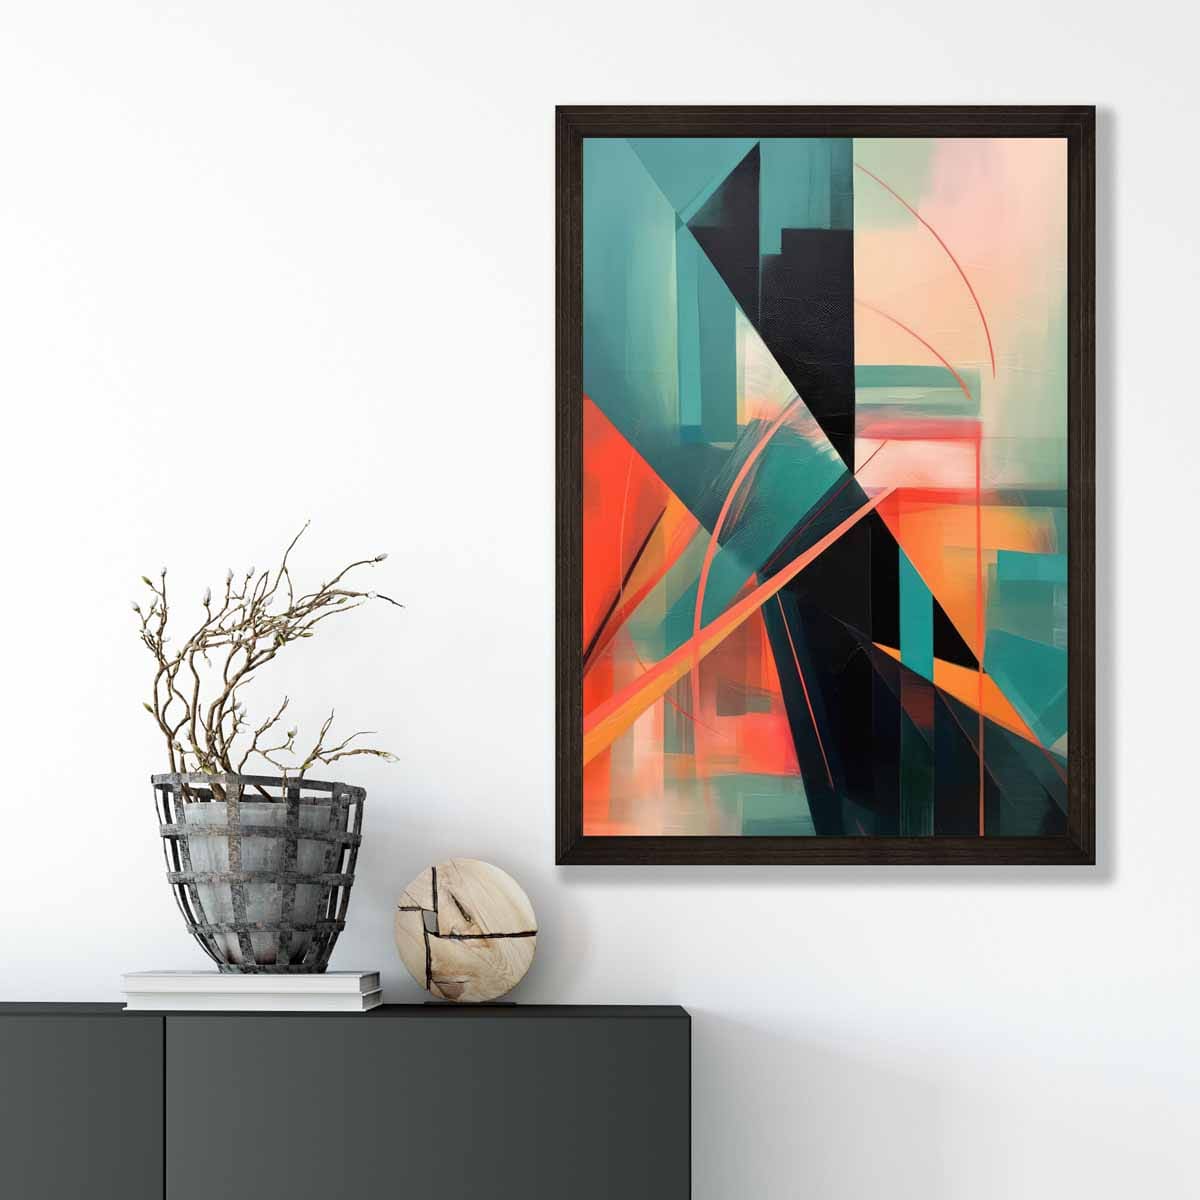 Modern Abstract Shapes Wall Art Poster Teal Blue Orange and Black No 3